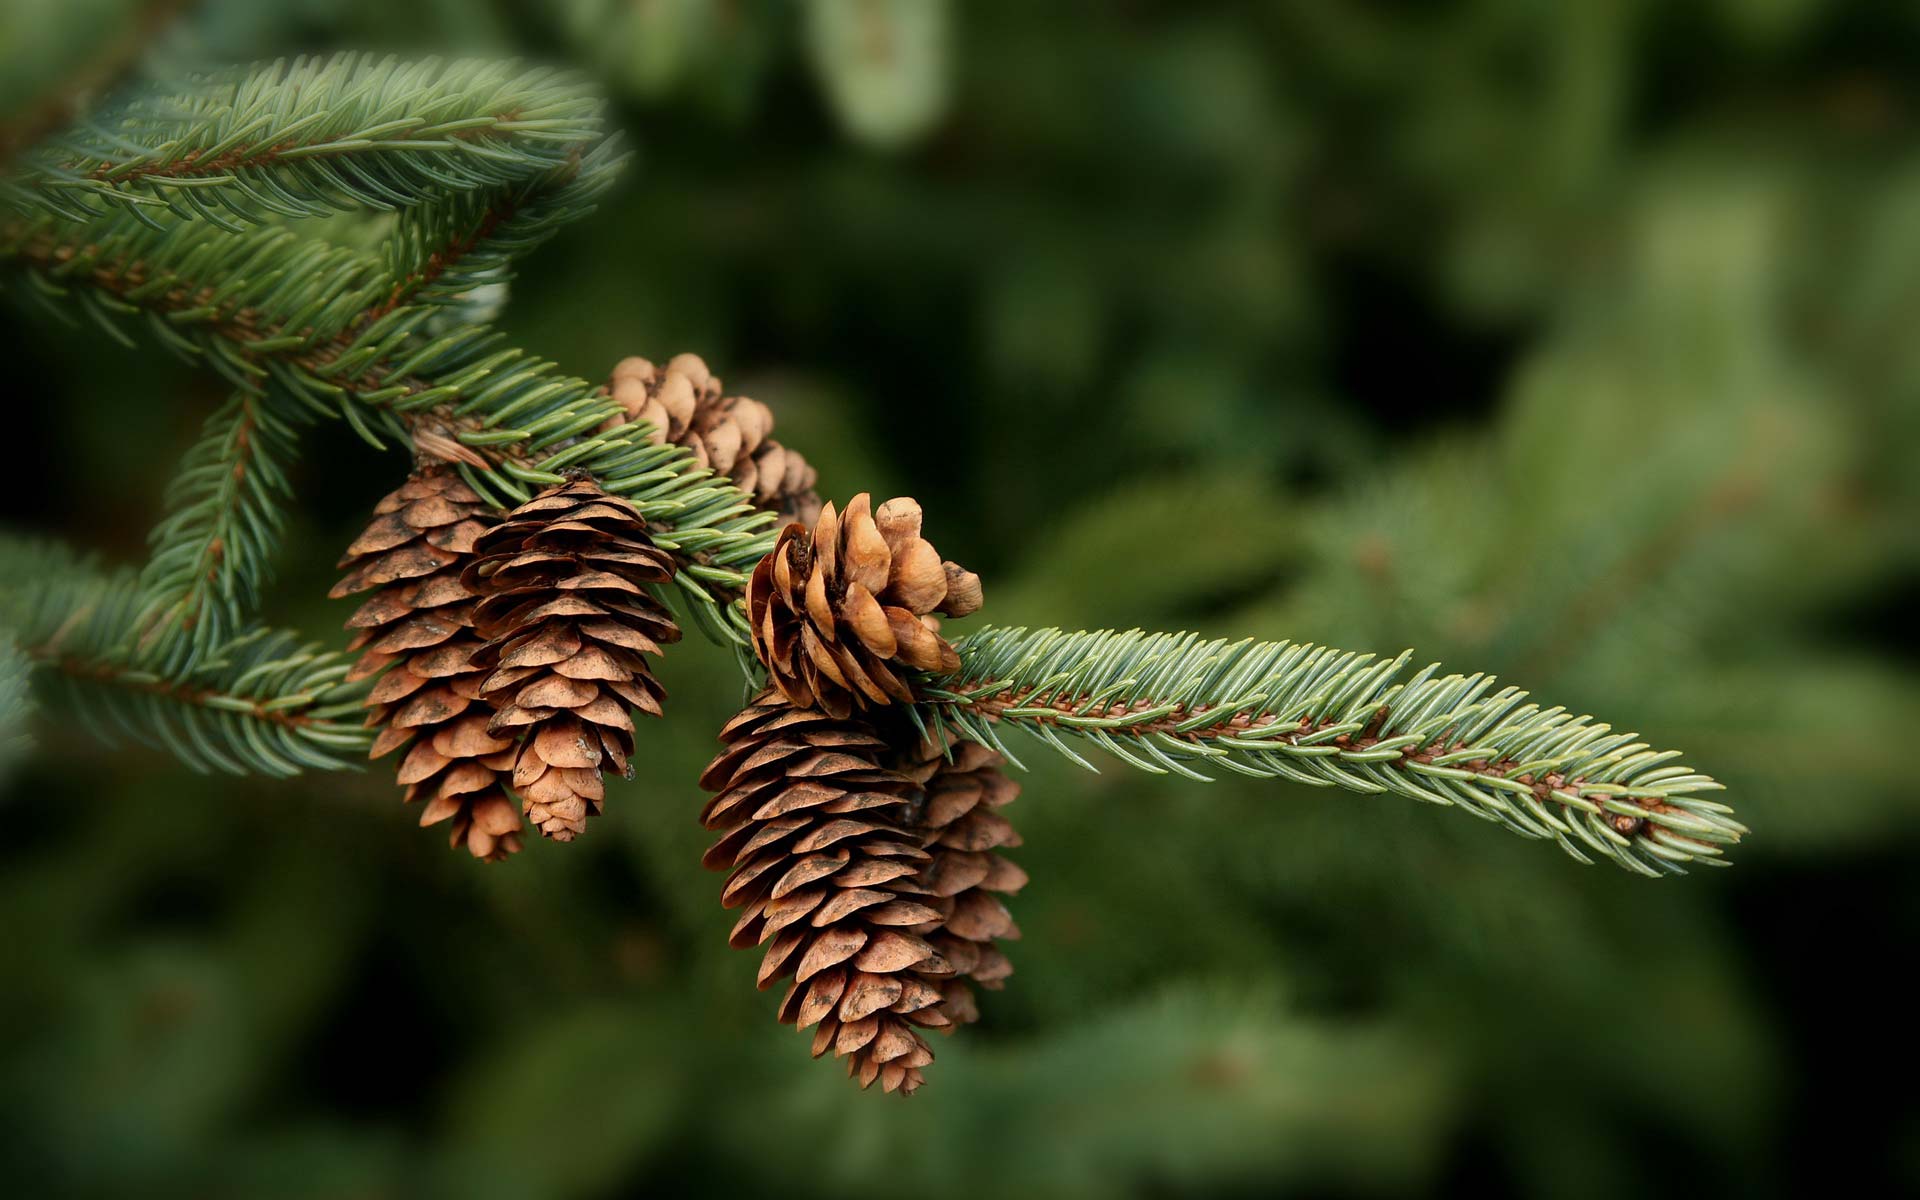  708kb wallpapers photography beautiful pinecone wallpaper 466 x 525